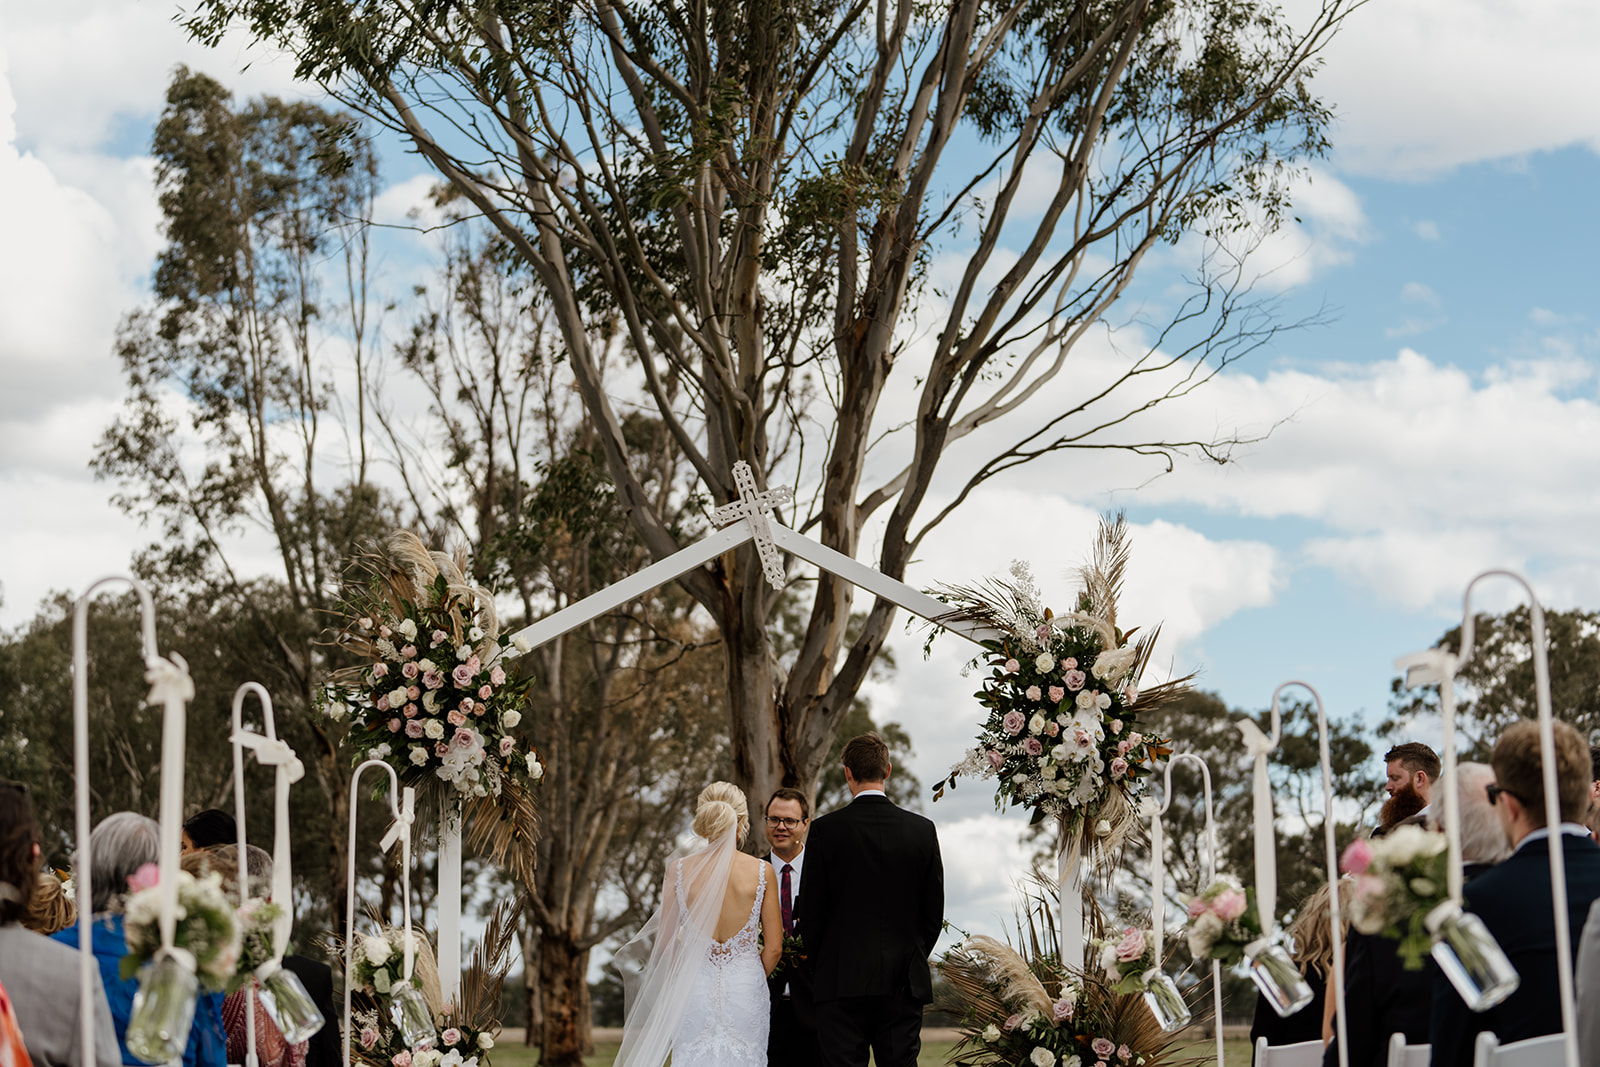 Walla Walla Farm wedding ceremony. Pink and white wedding flowers by Albury Florist, Flowers Naturally. Outdoor Wedding 